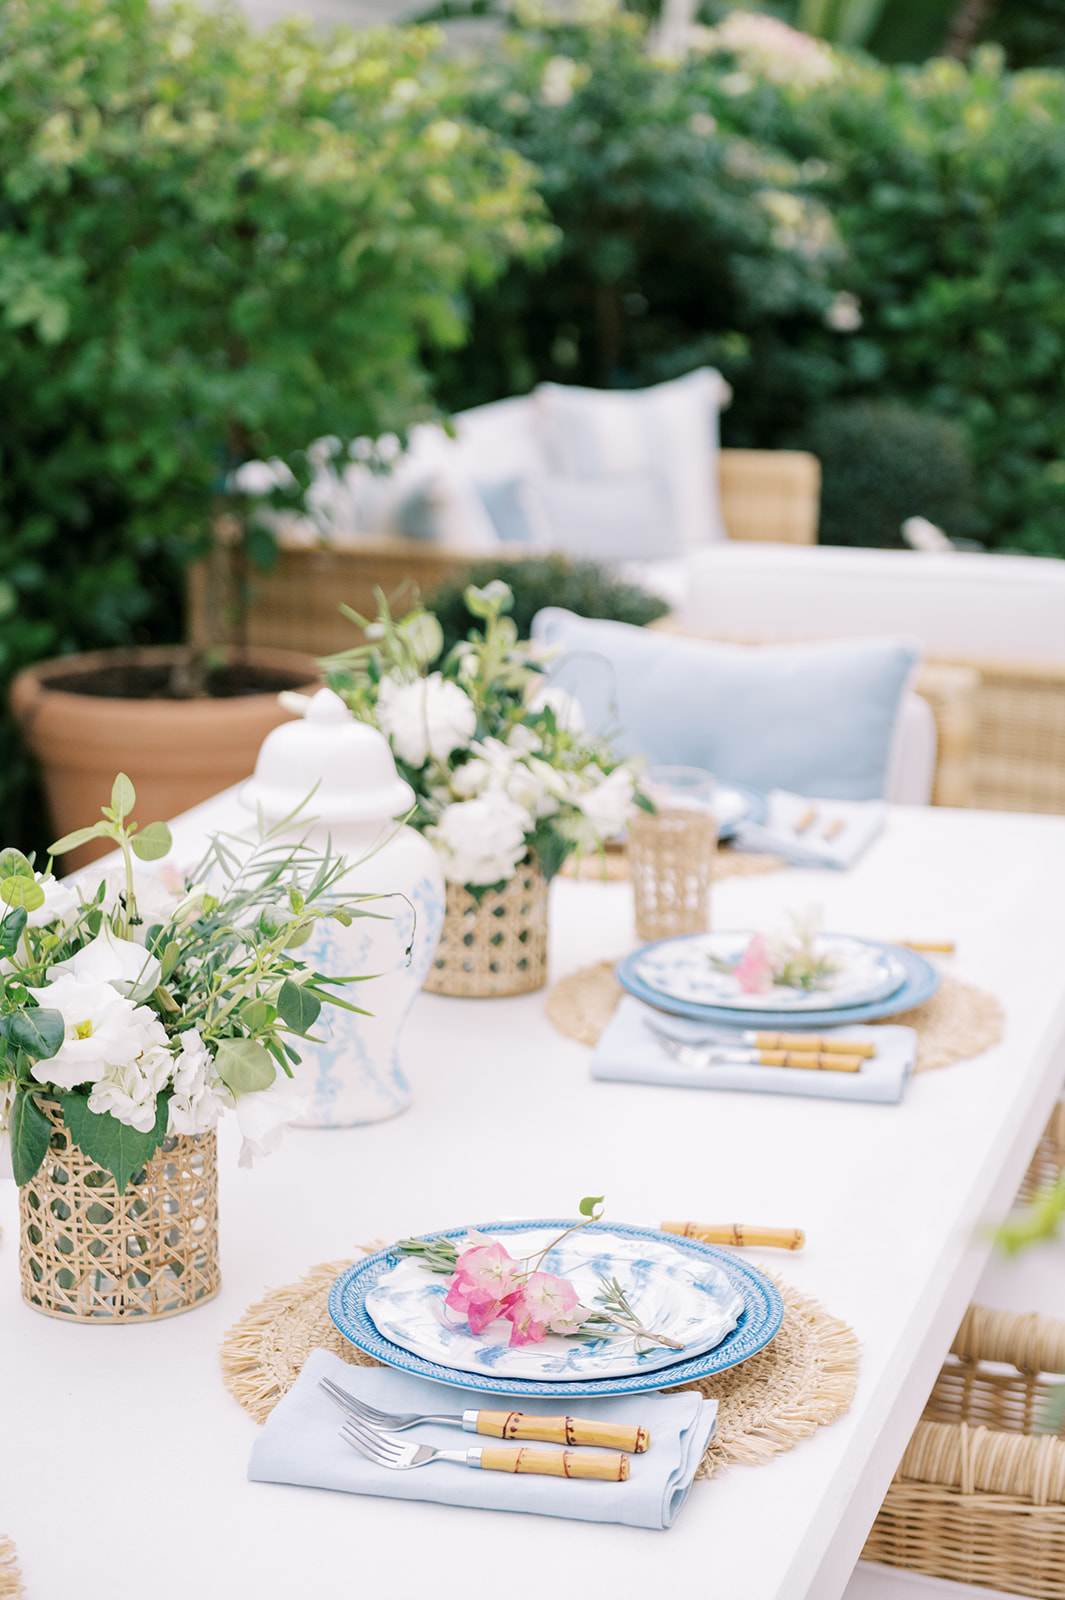 Home: Serena & Lily's Event of the Year! | Palm Beach Lately